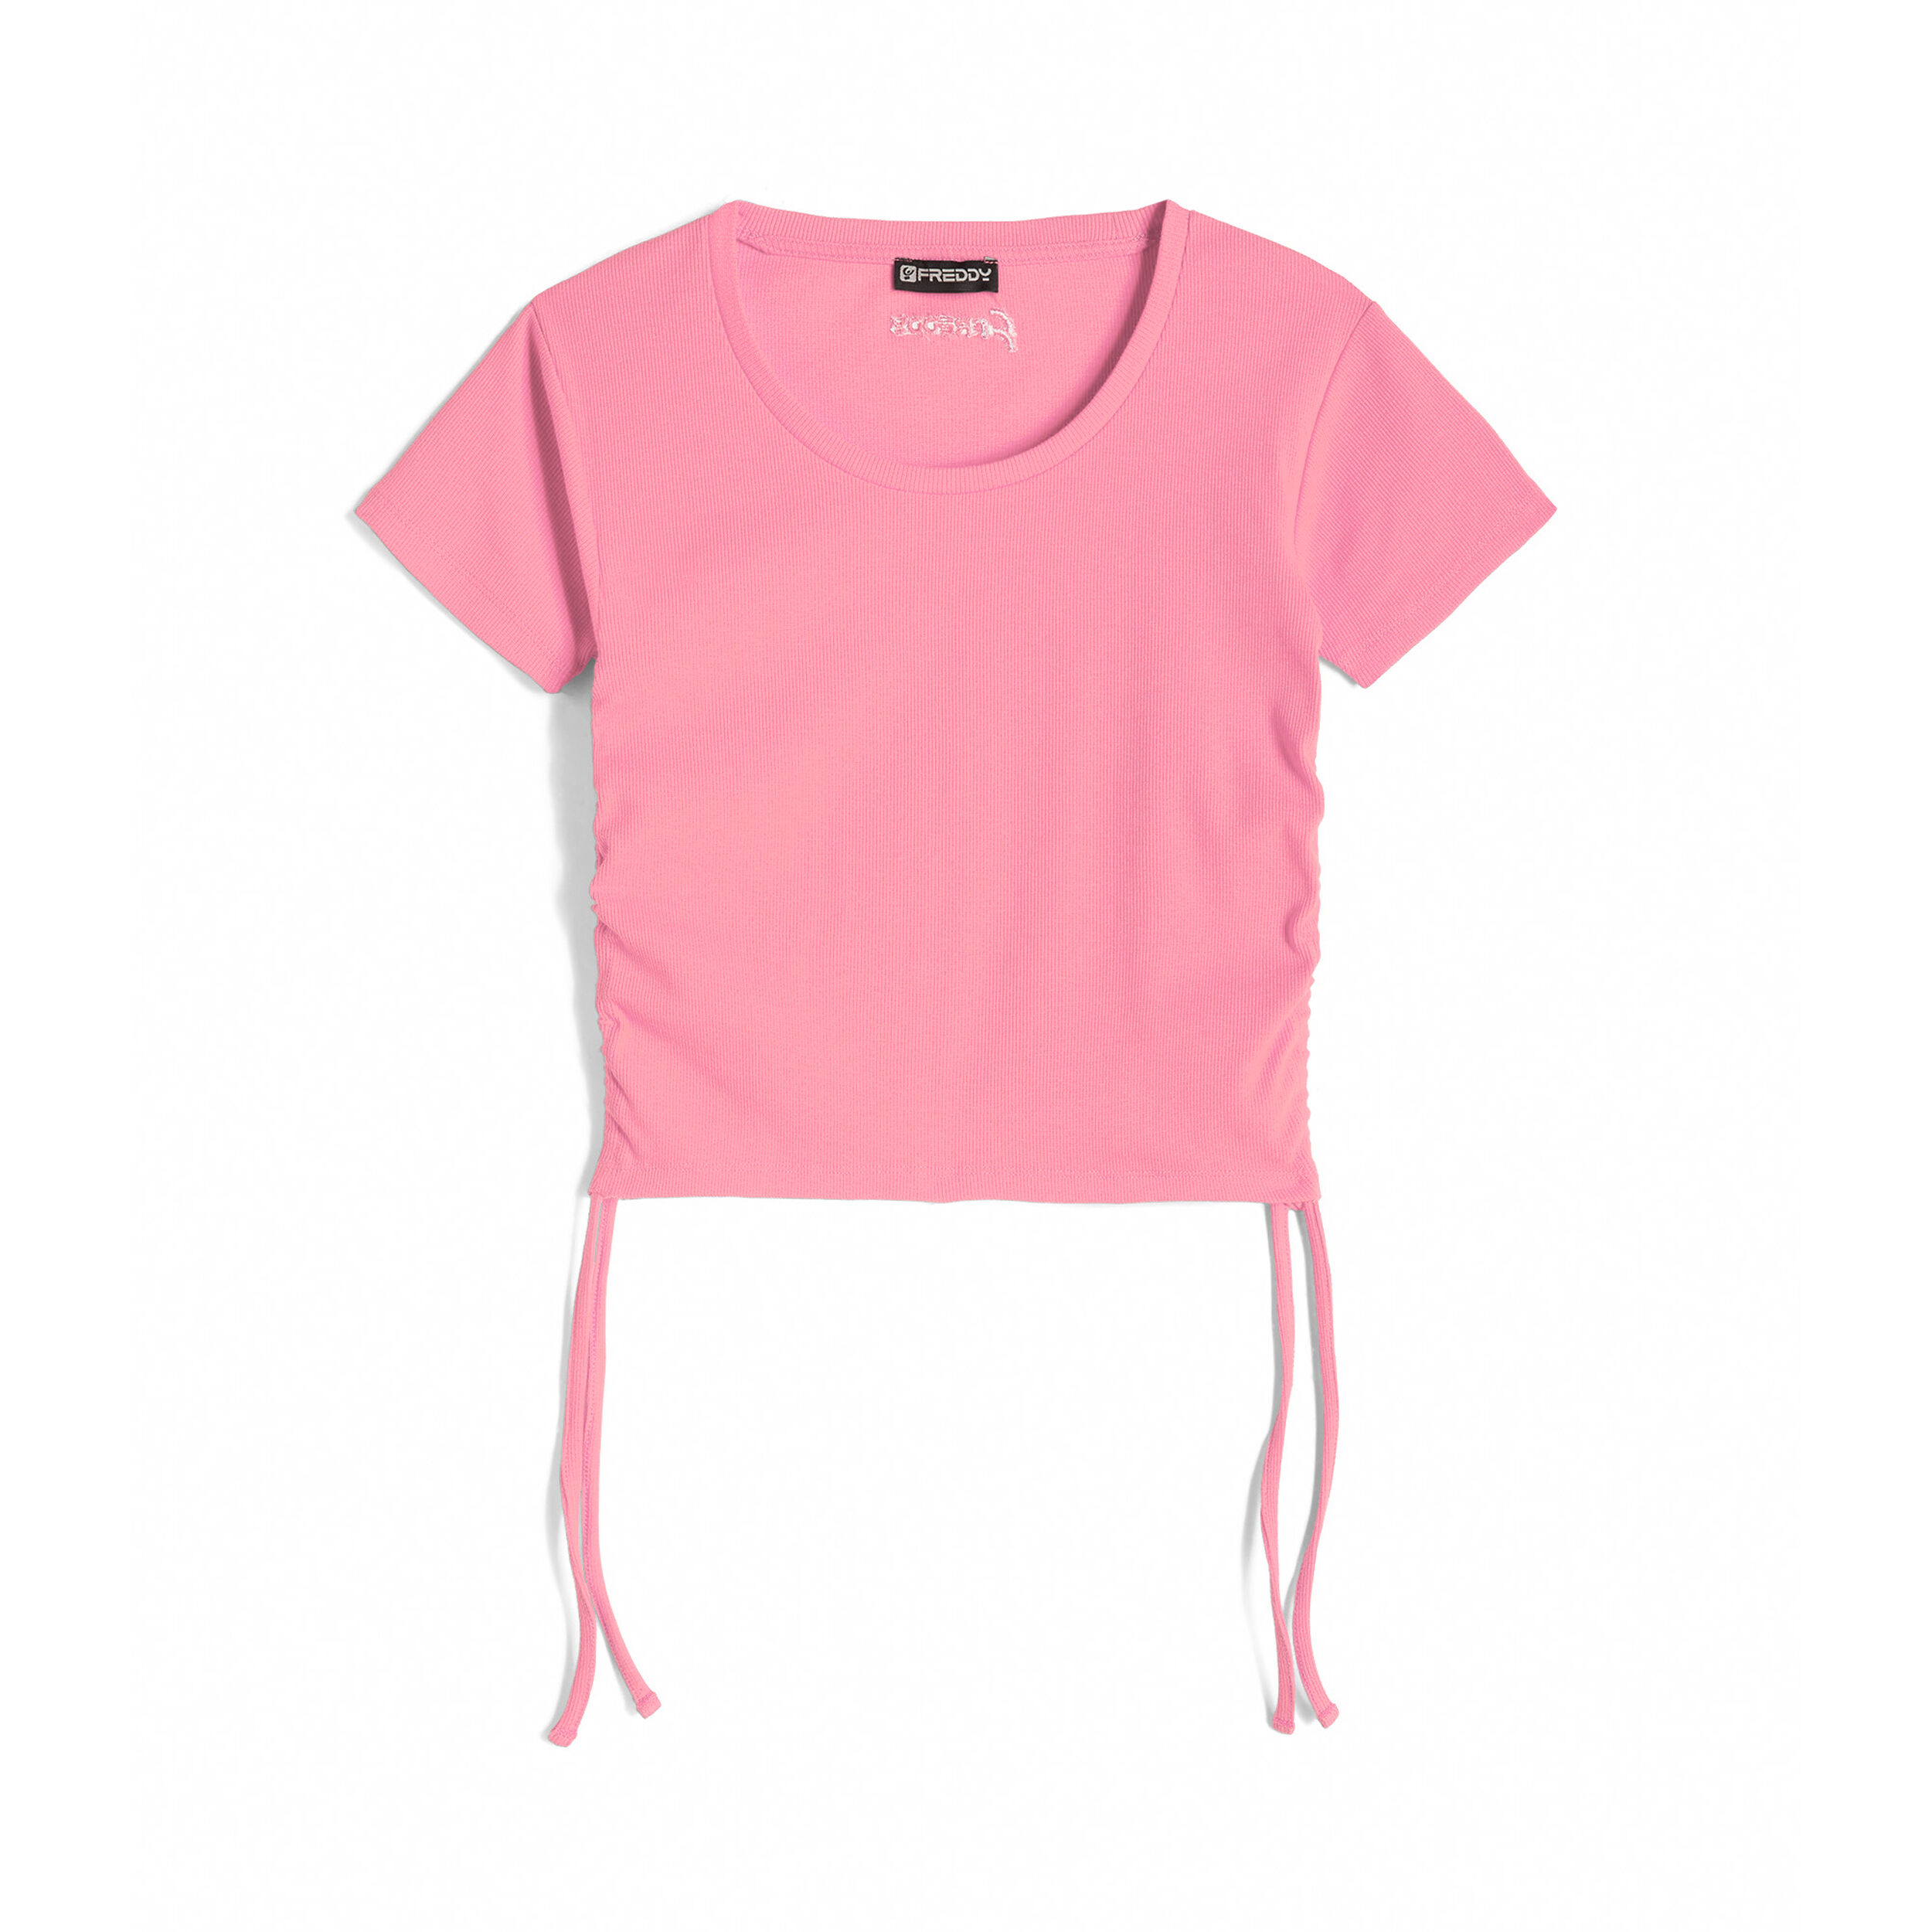 Freddy T-shirt donna slim fit in costina con laccetti sui fianchi Pink Carnation Donna Extra Large